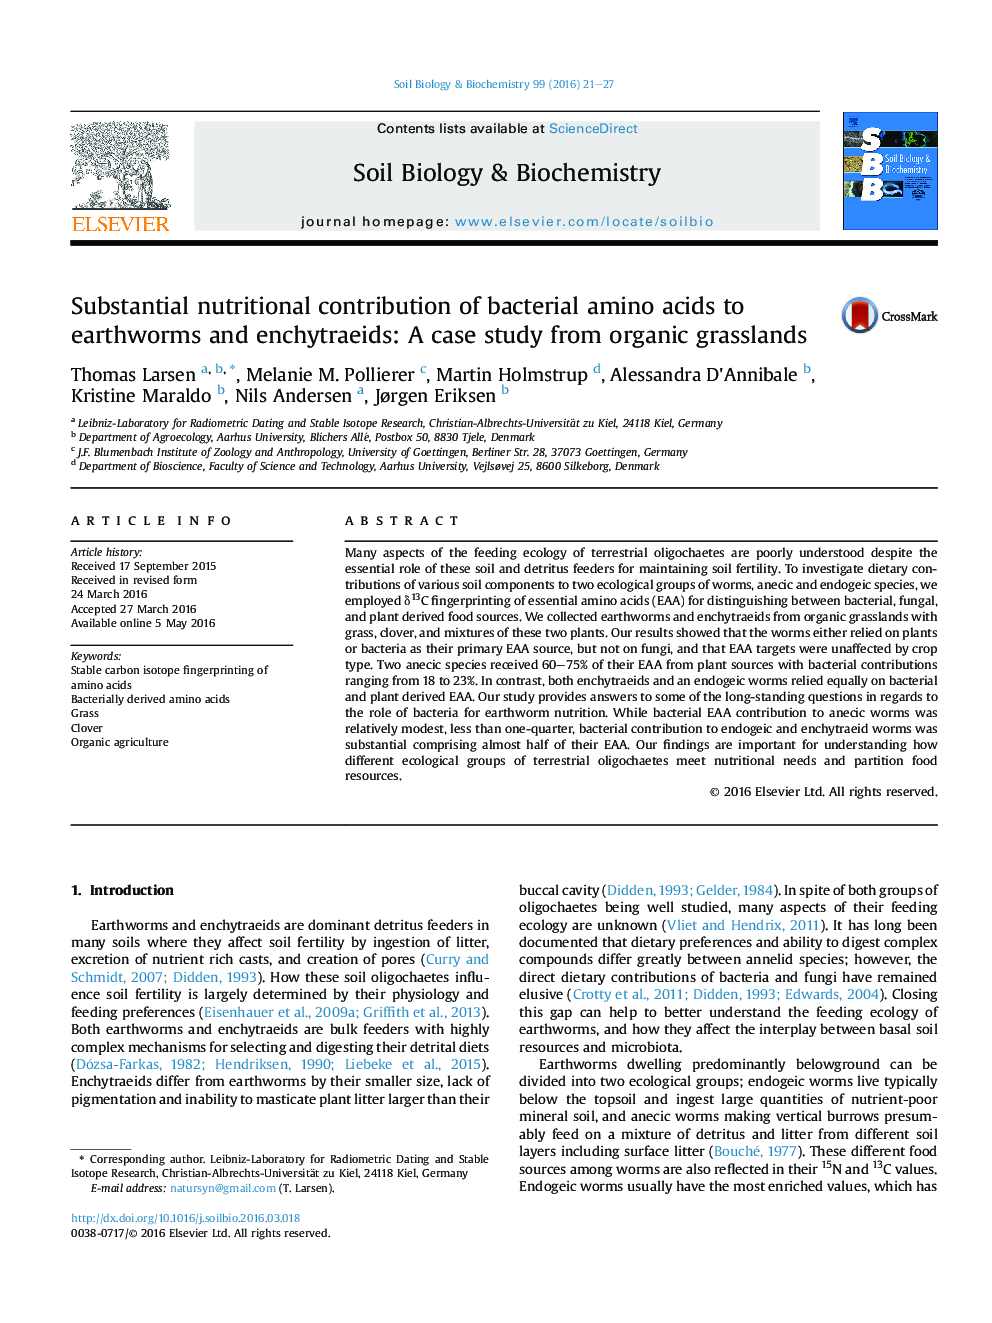 Substantial nutritional contribution of bacterial amino acids to earthworms and enchytraeids: A case study from organic grasslands